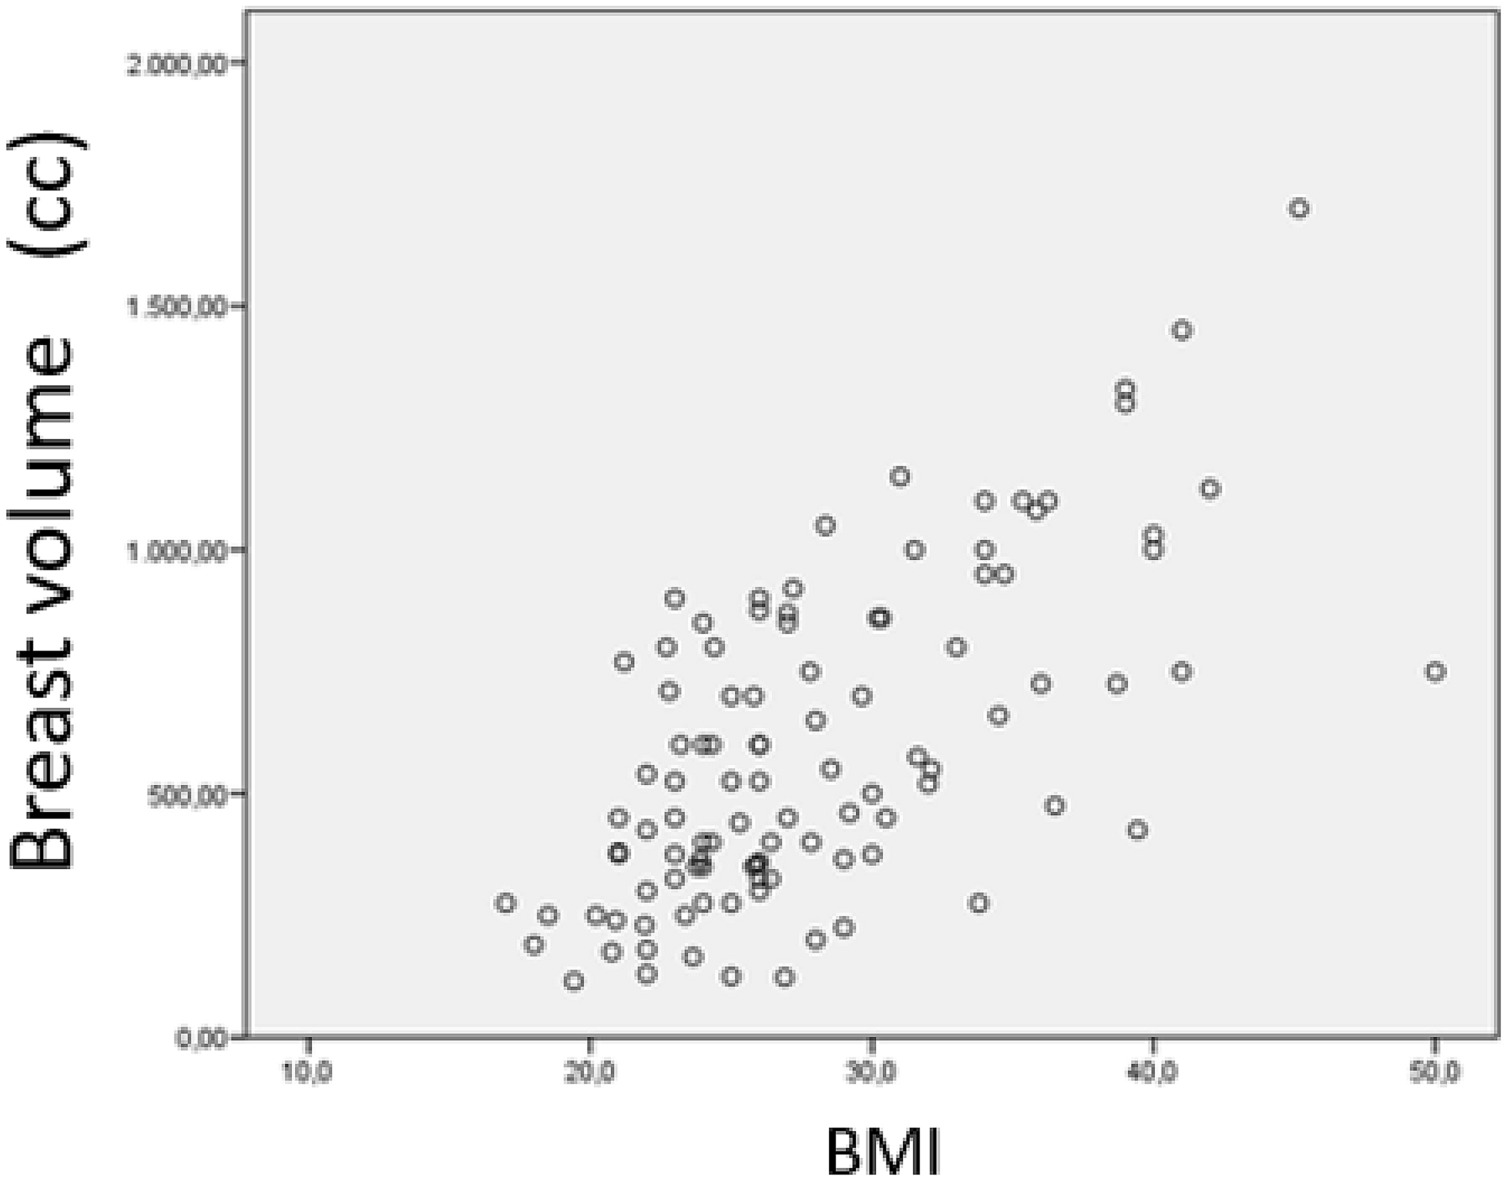 Breast Size Index [BSI], the BMI equivalent for boobs/size in